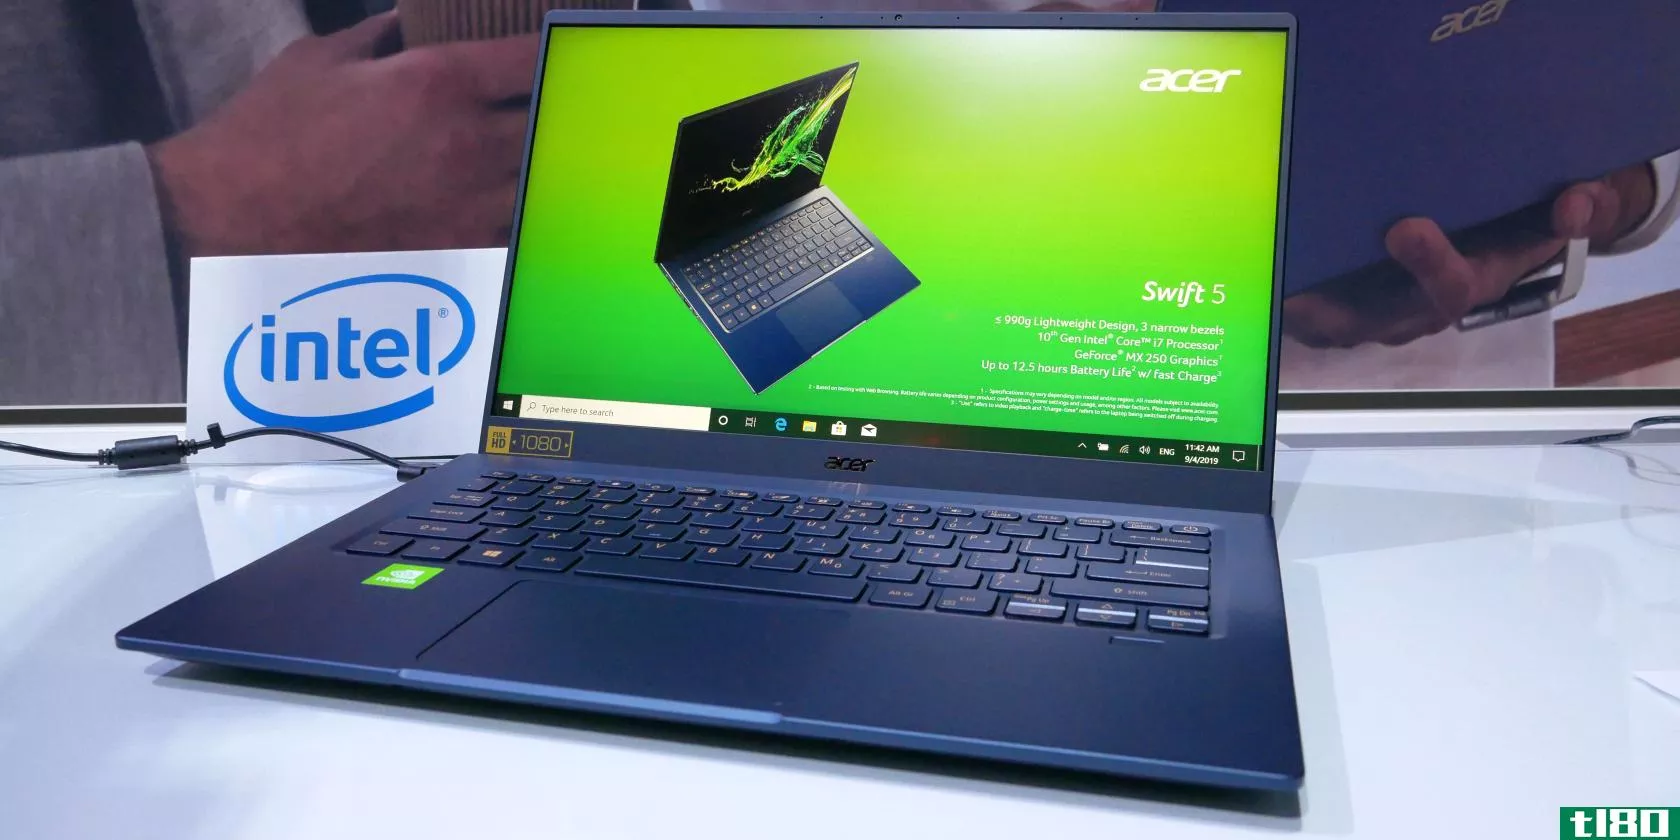 Acer Swift 5 updated model launched at IFA 2019